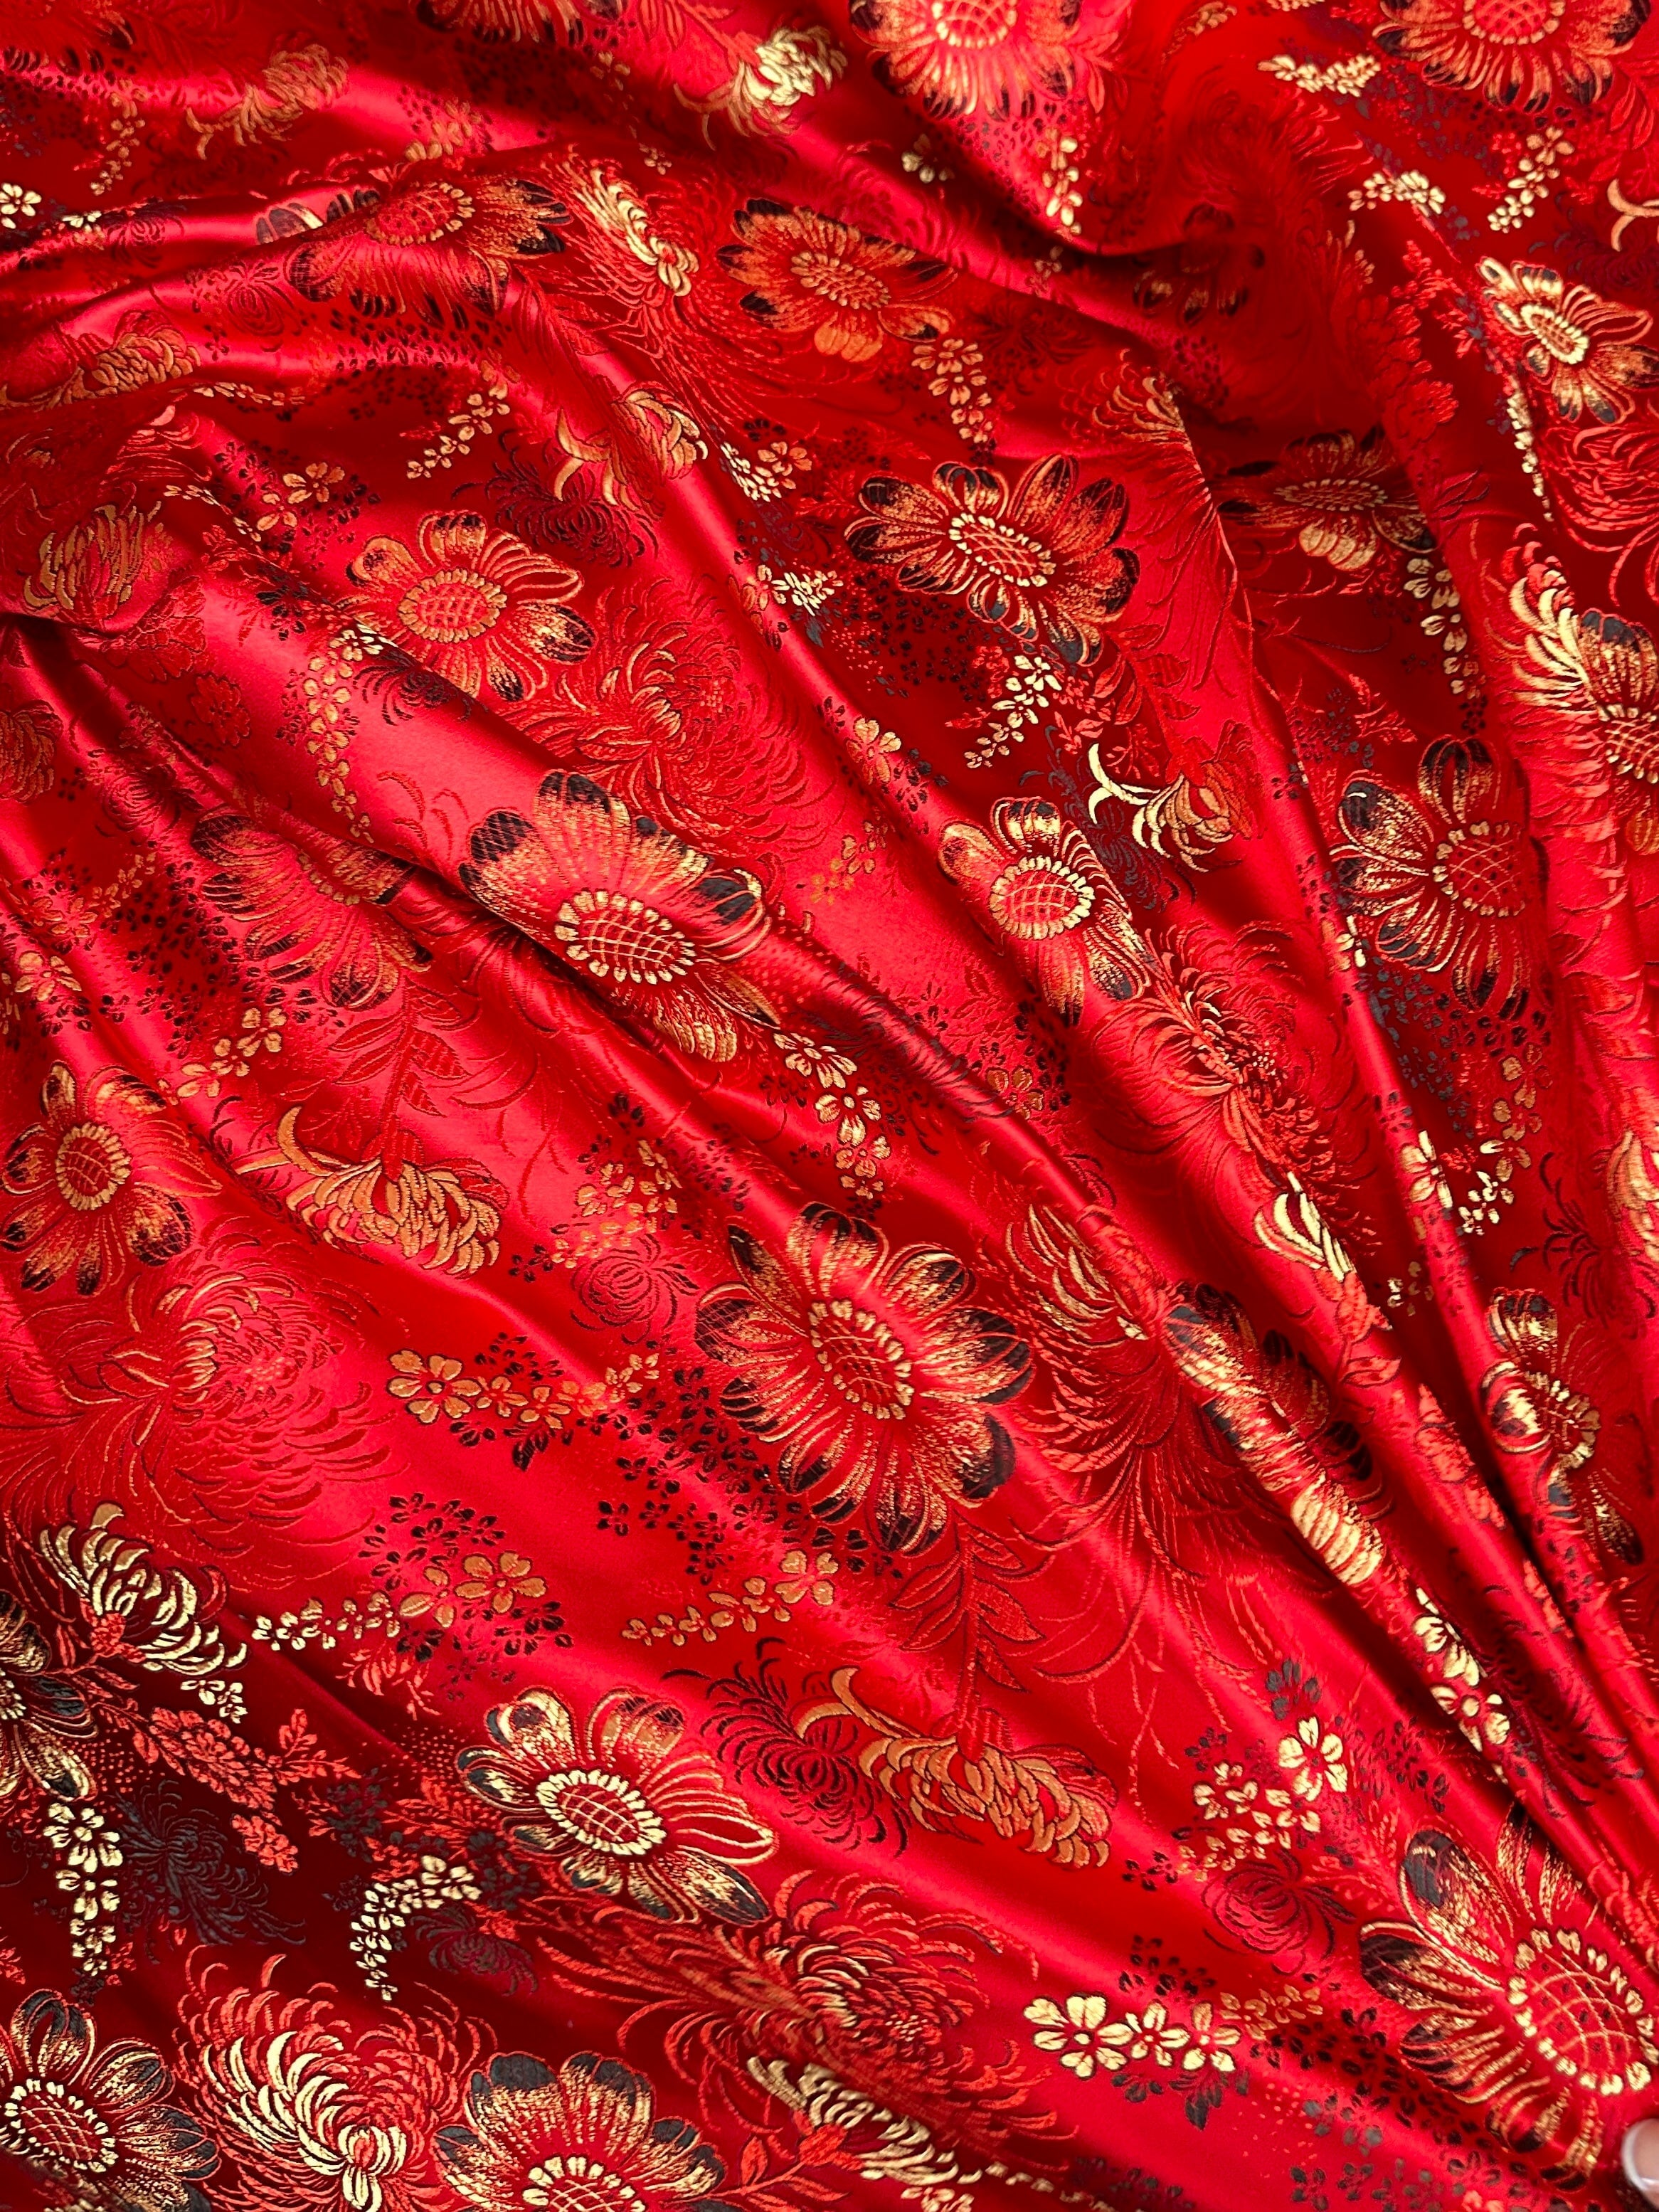 Red Chinese Embroidery Brocade, Embroidery Brocade for woman, Embroidery Brocade for bride, Embroidery Brocade in low price, dark red Embroidery Brocade, light red Embroidery Brocade, Embroidery Brocade on sale, traditional Embroidery Brocade 